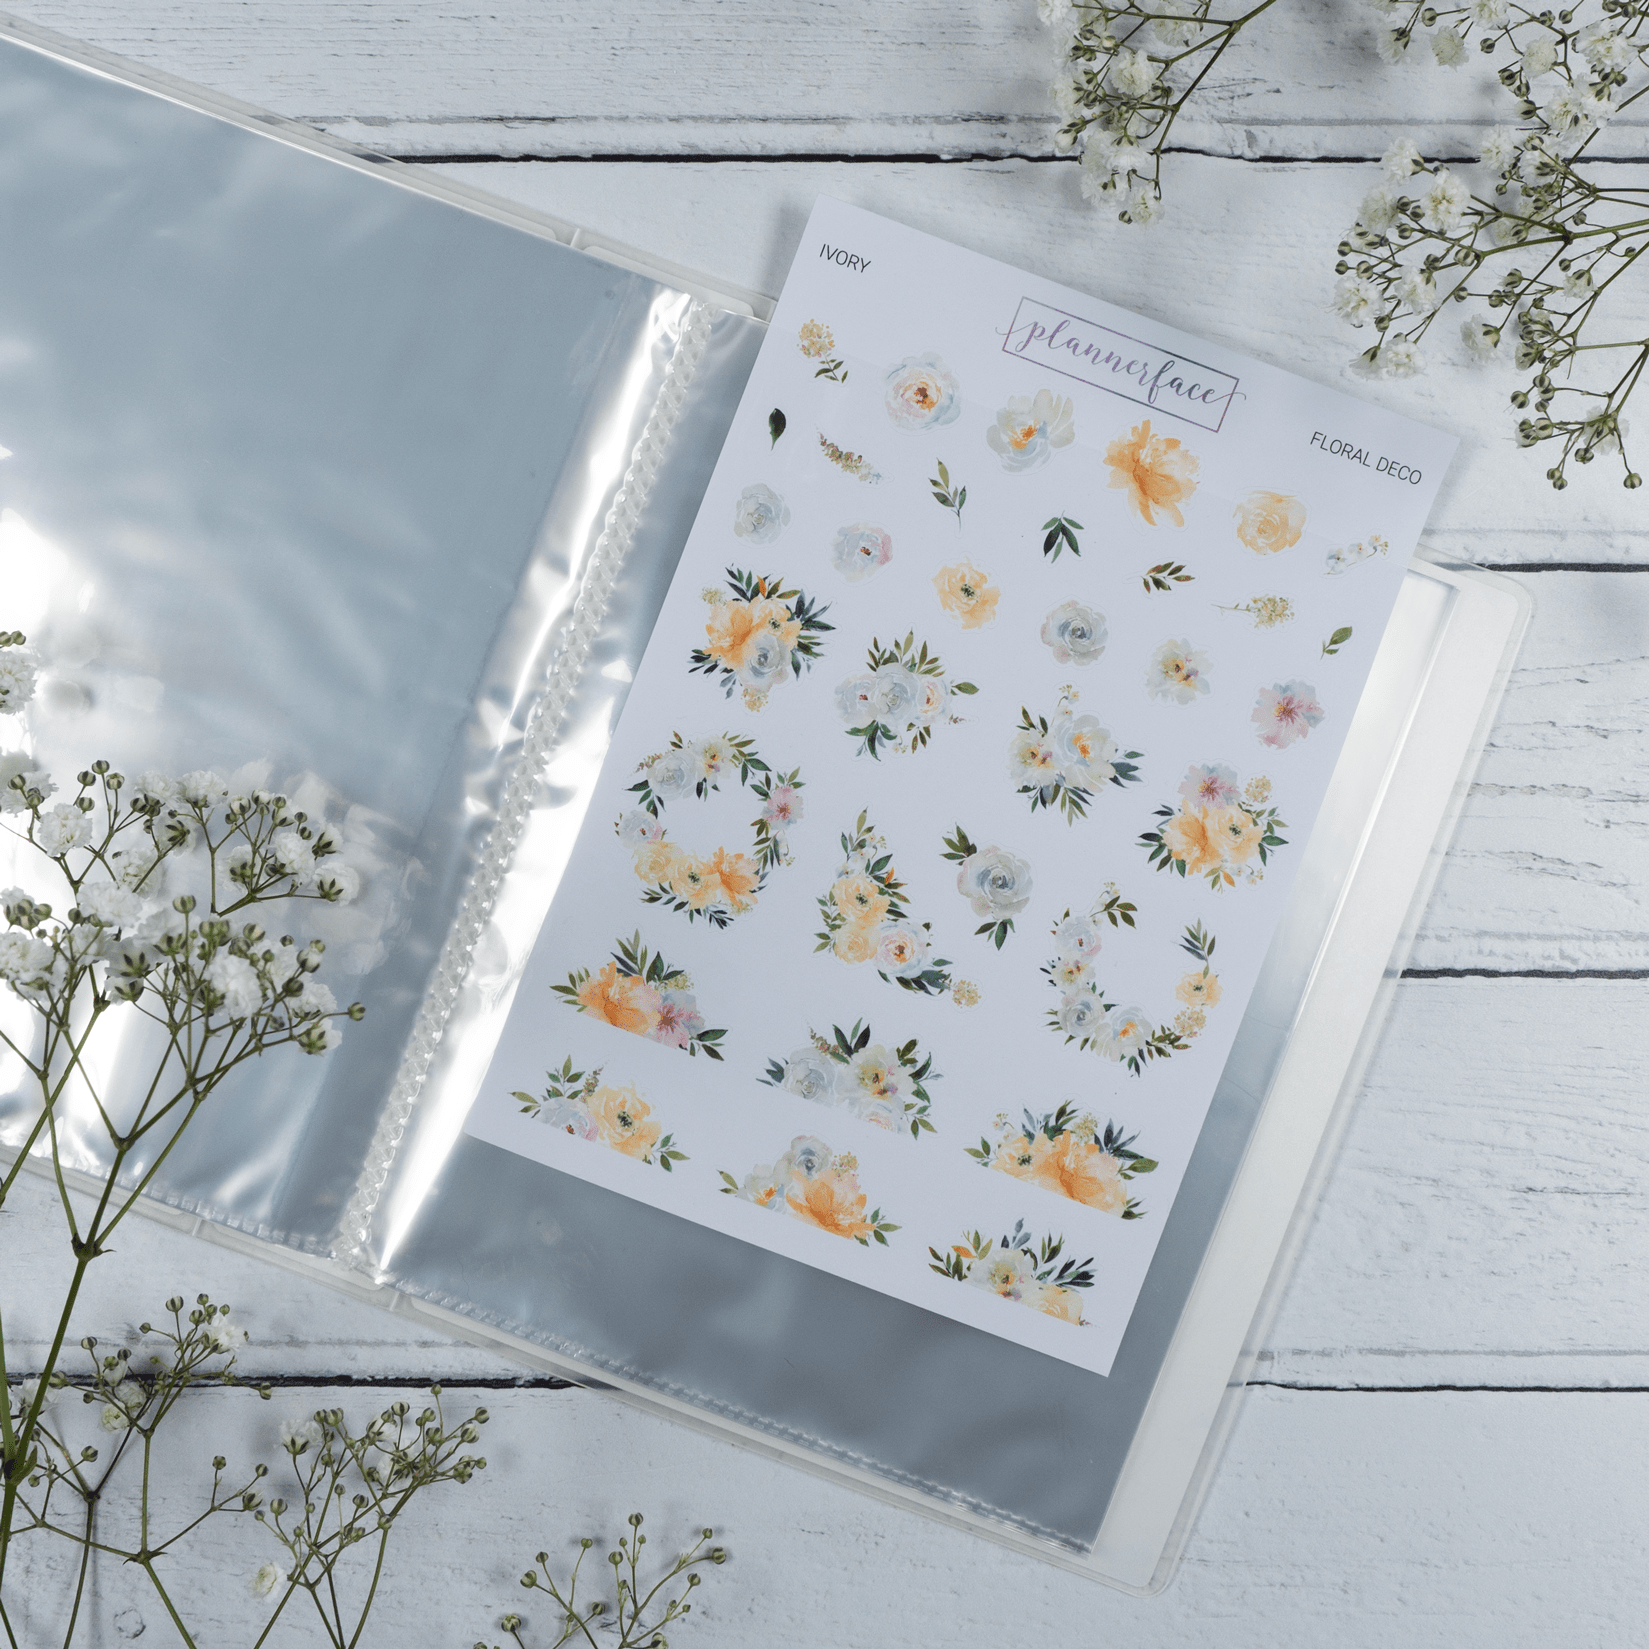 Ava Sticker Album (Large) by Plannerface